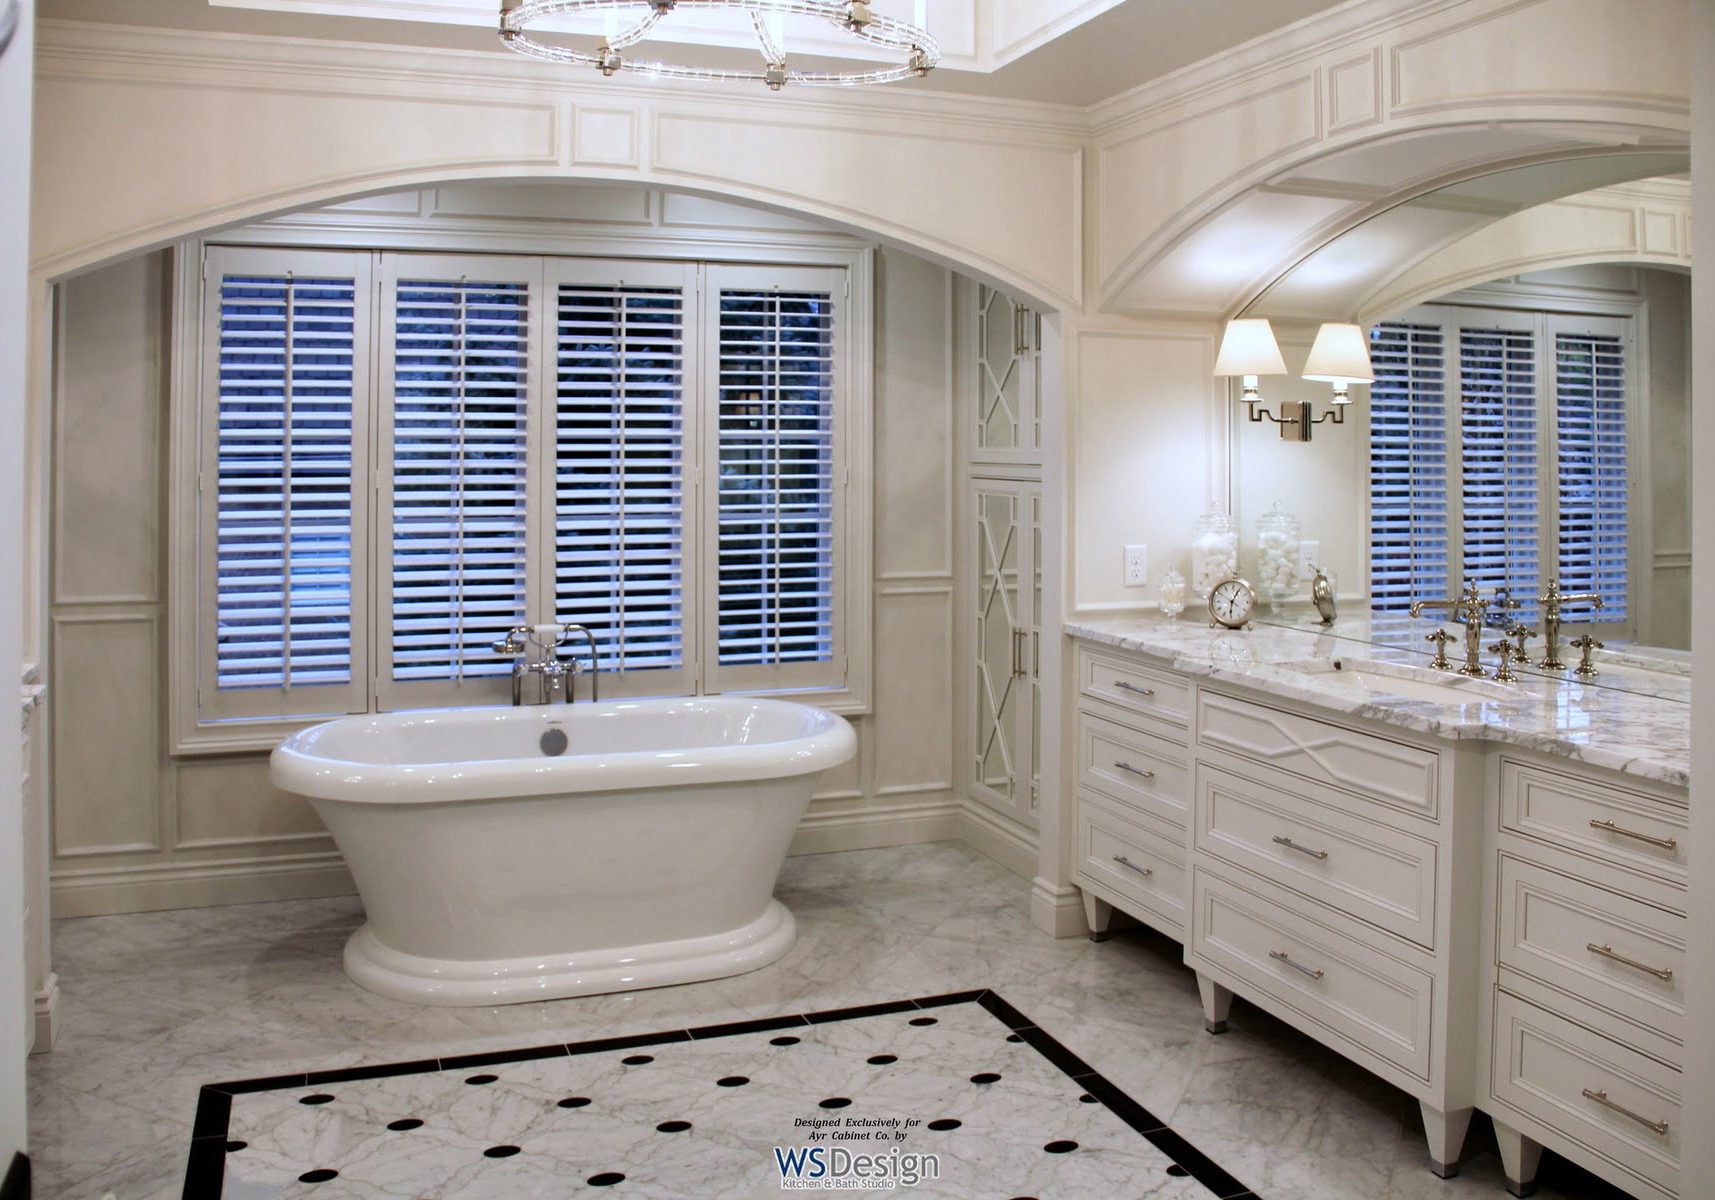 Luxury Master Bathroom Remodel Ideas, Do All Master Bathrooms Have Tubs